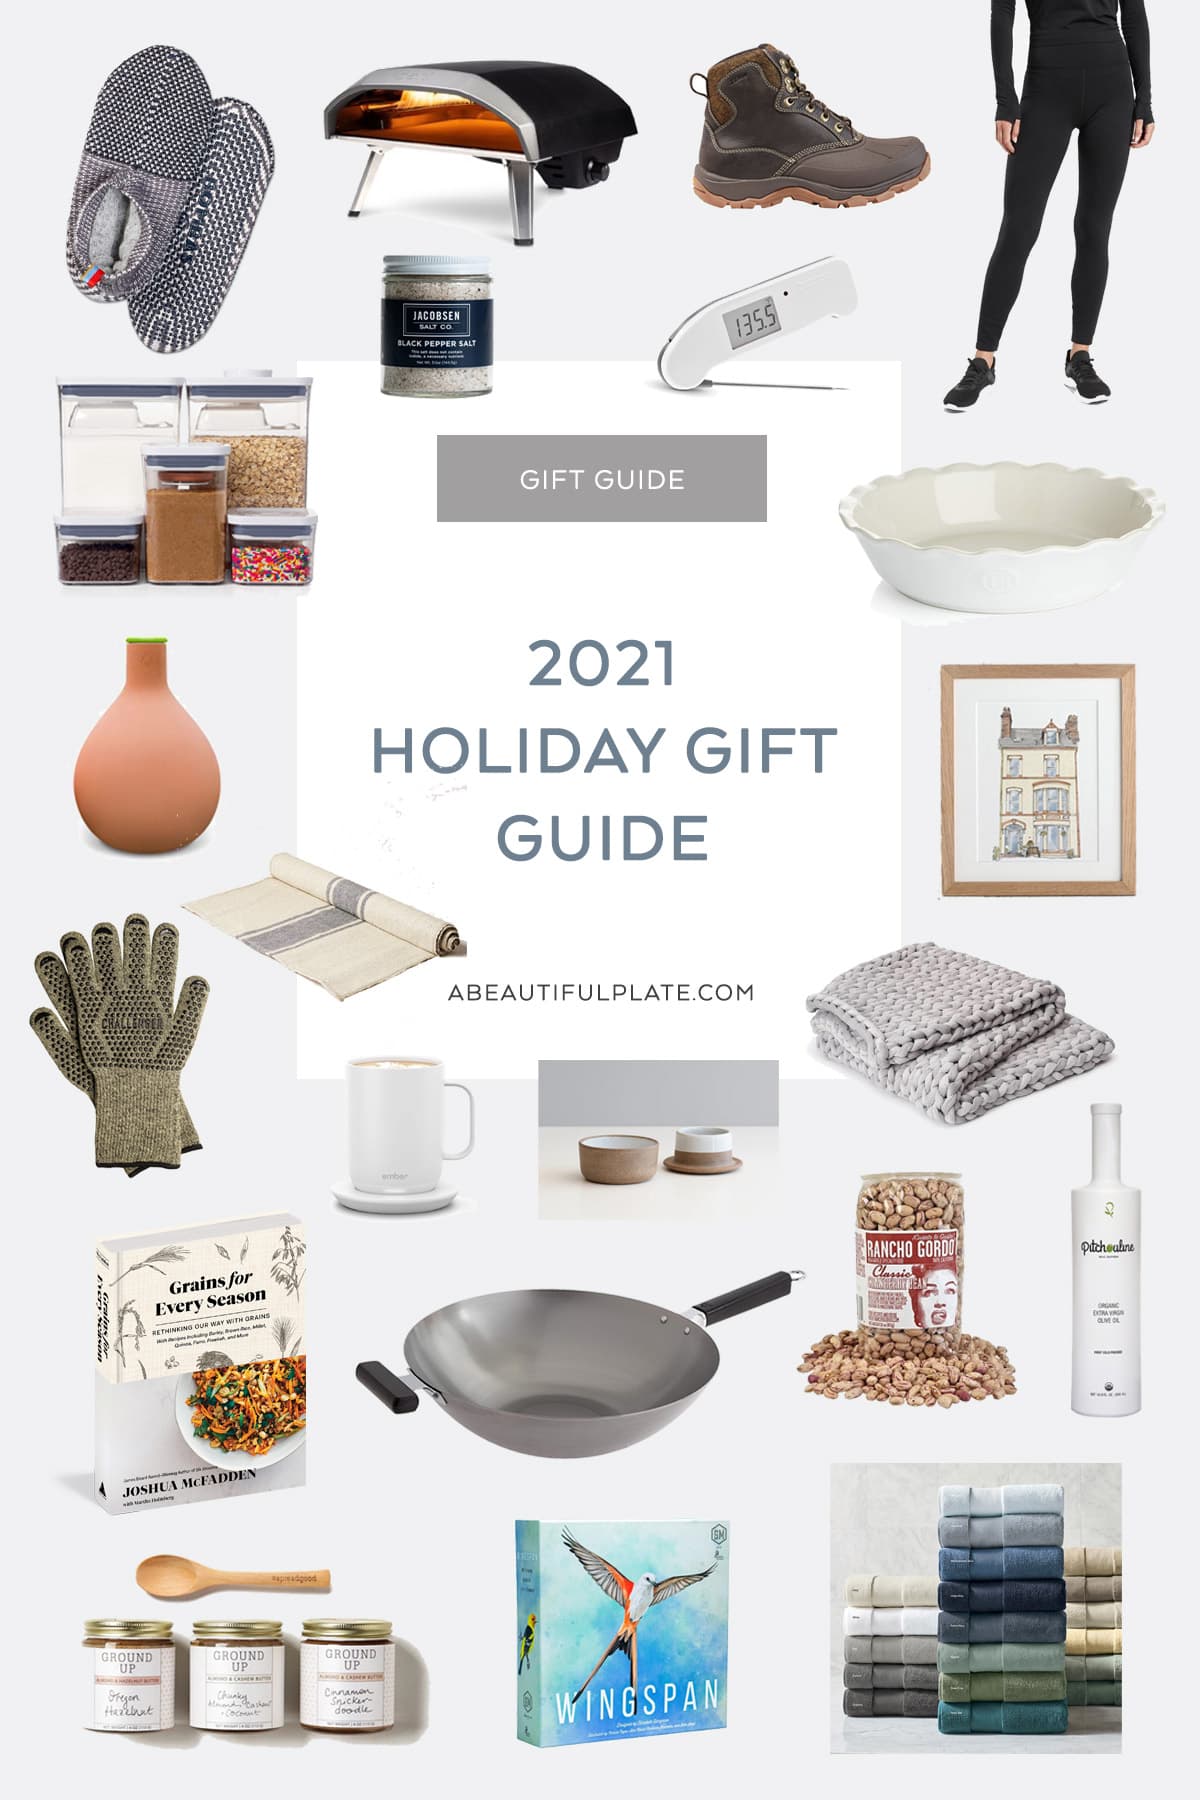 The Cozy Girl Holiday Gift Guide - Nikki's Plate Blog